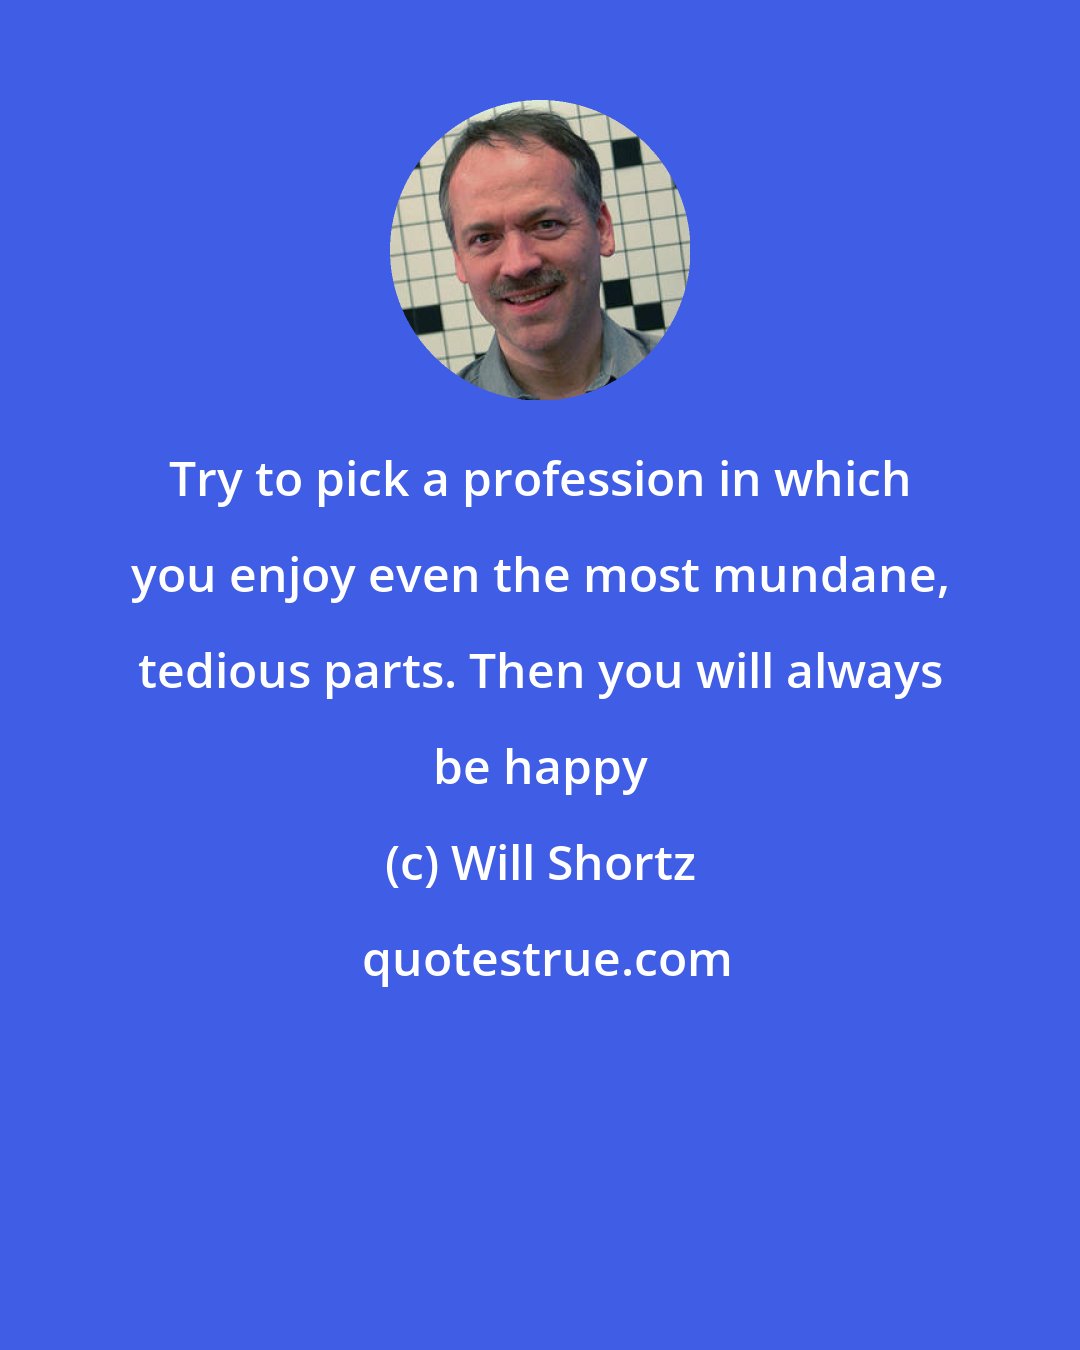 Will Shortz: Try to pick a profession in which you enjoy even the most mundane, tedious parts. Then you will always be happy